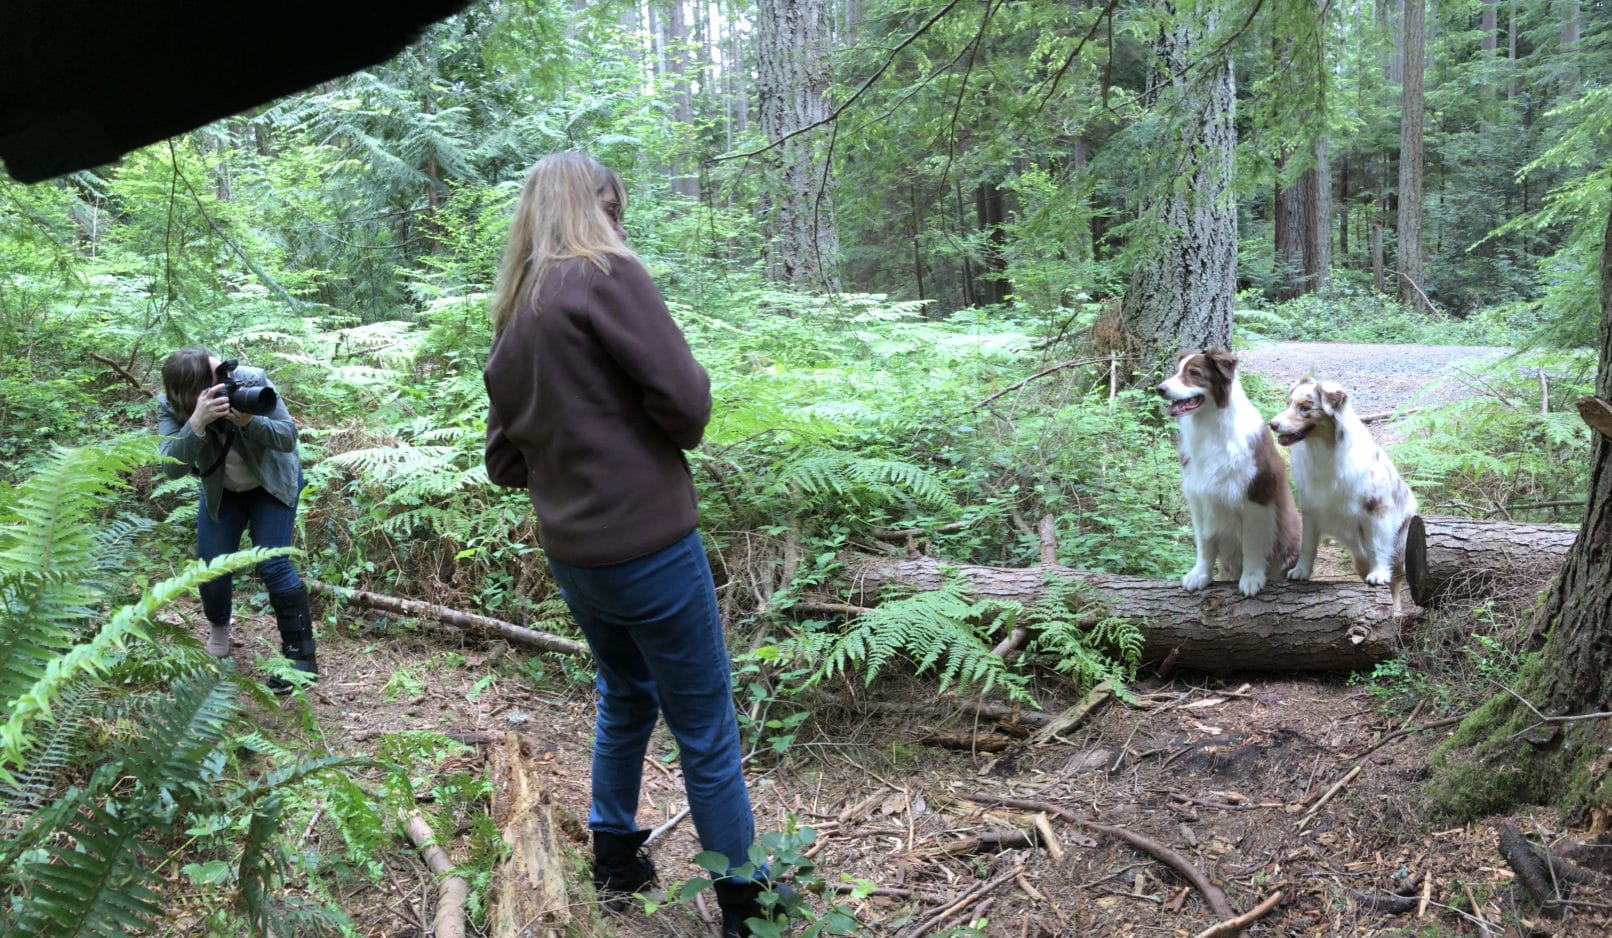 outdoor photo shoot of two brown and white dogs perched on log with woman taking photo with a dslr